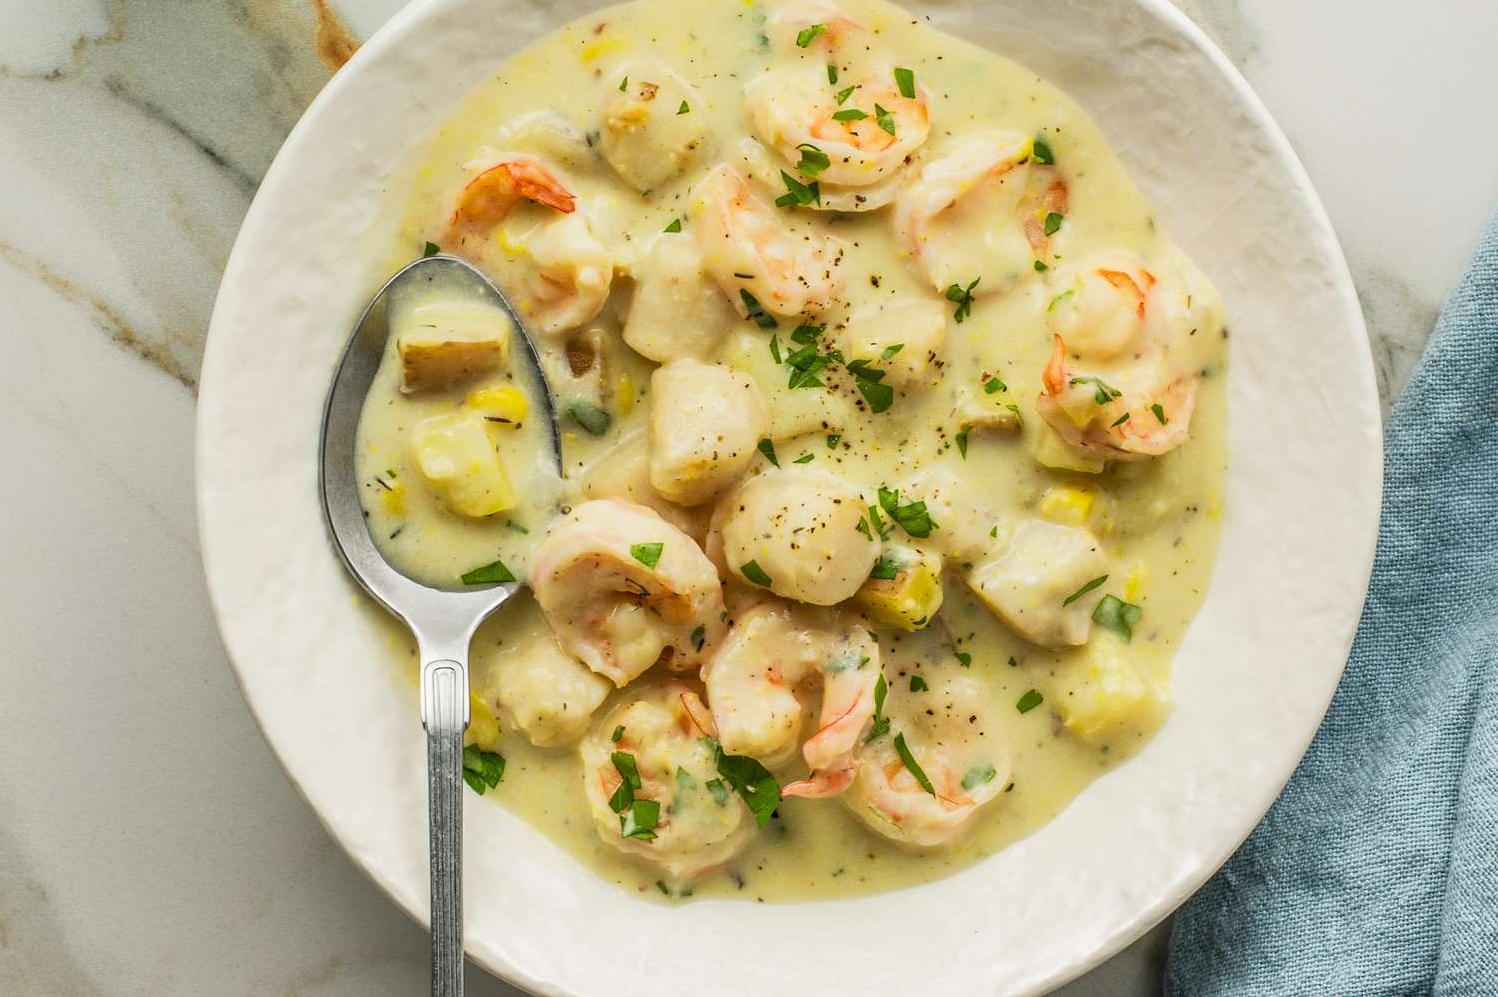  A taste of the South with every bite of this seafood chowder.